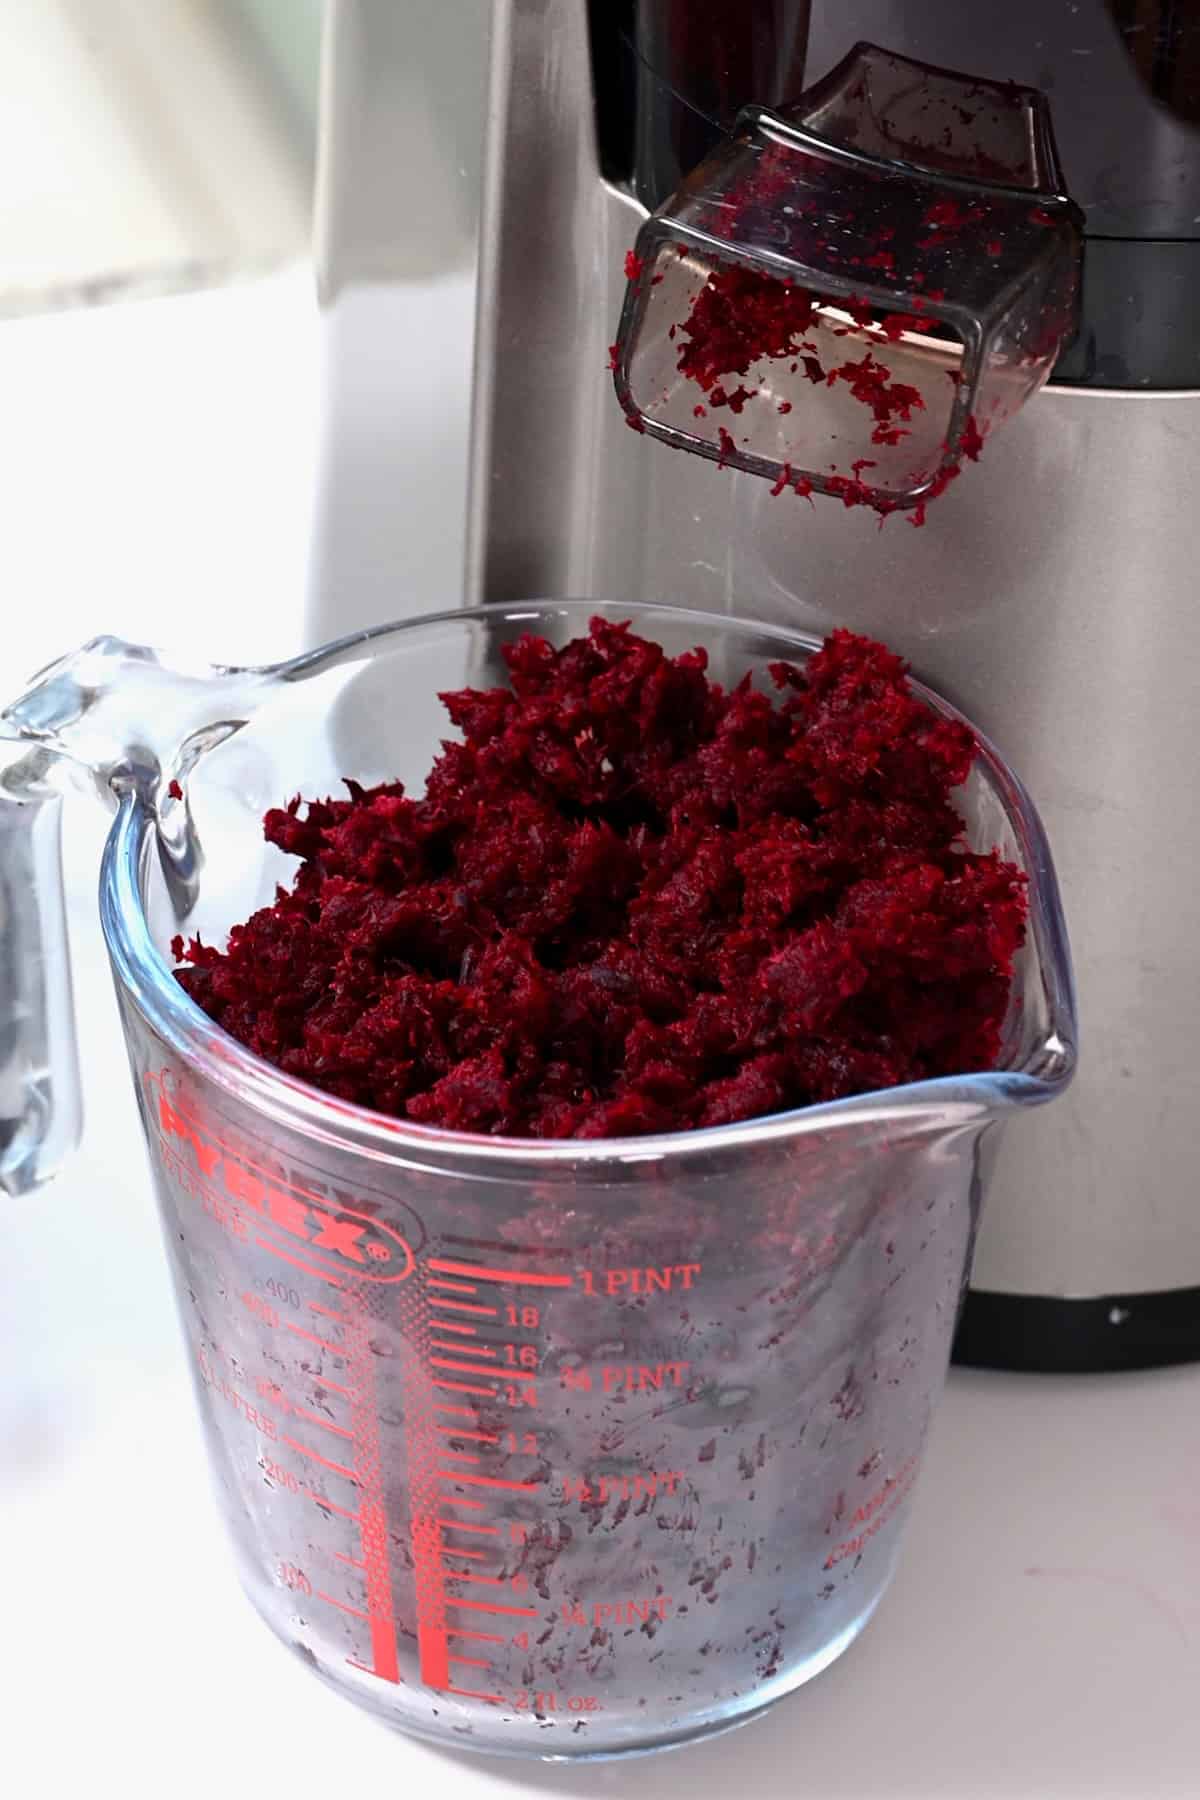 Beet pulp in a cup